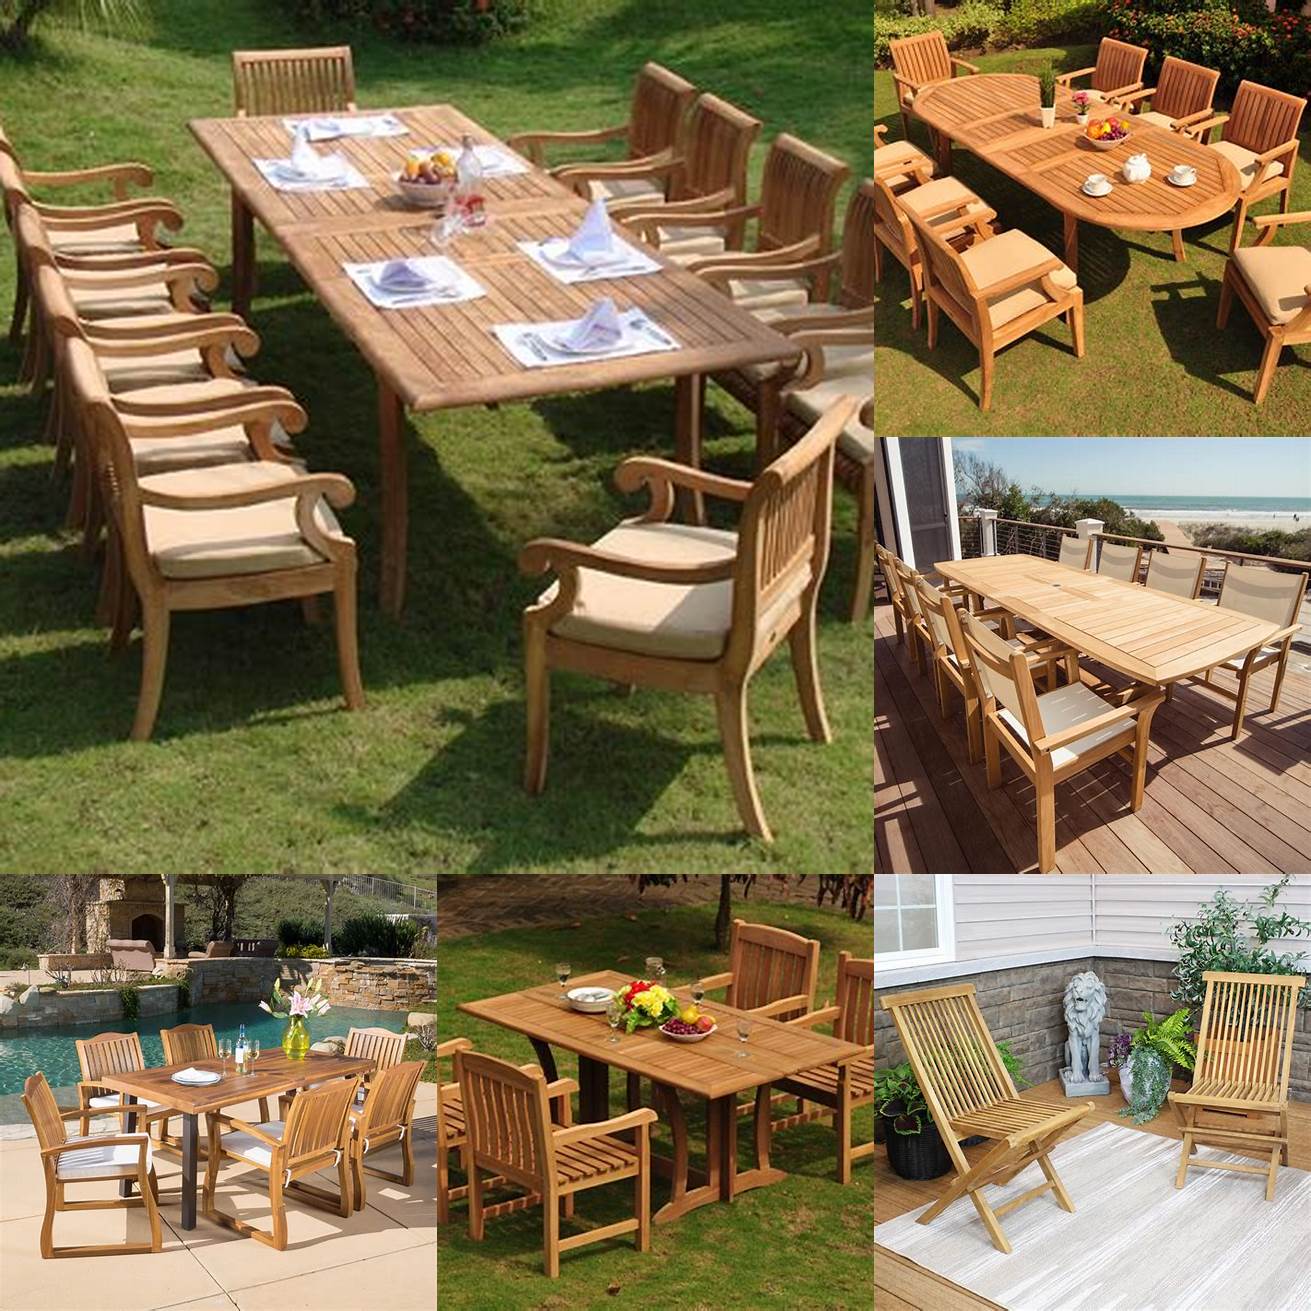 A customer comparing prices of teak outdoor furniture